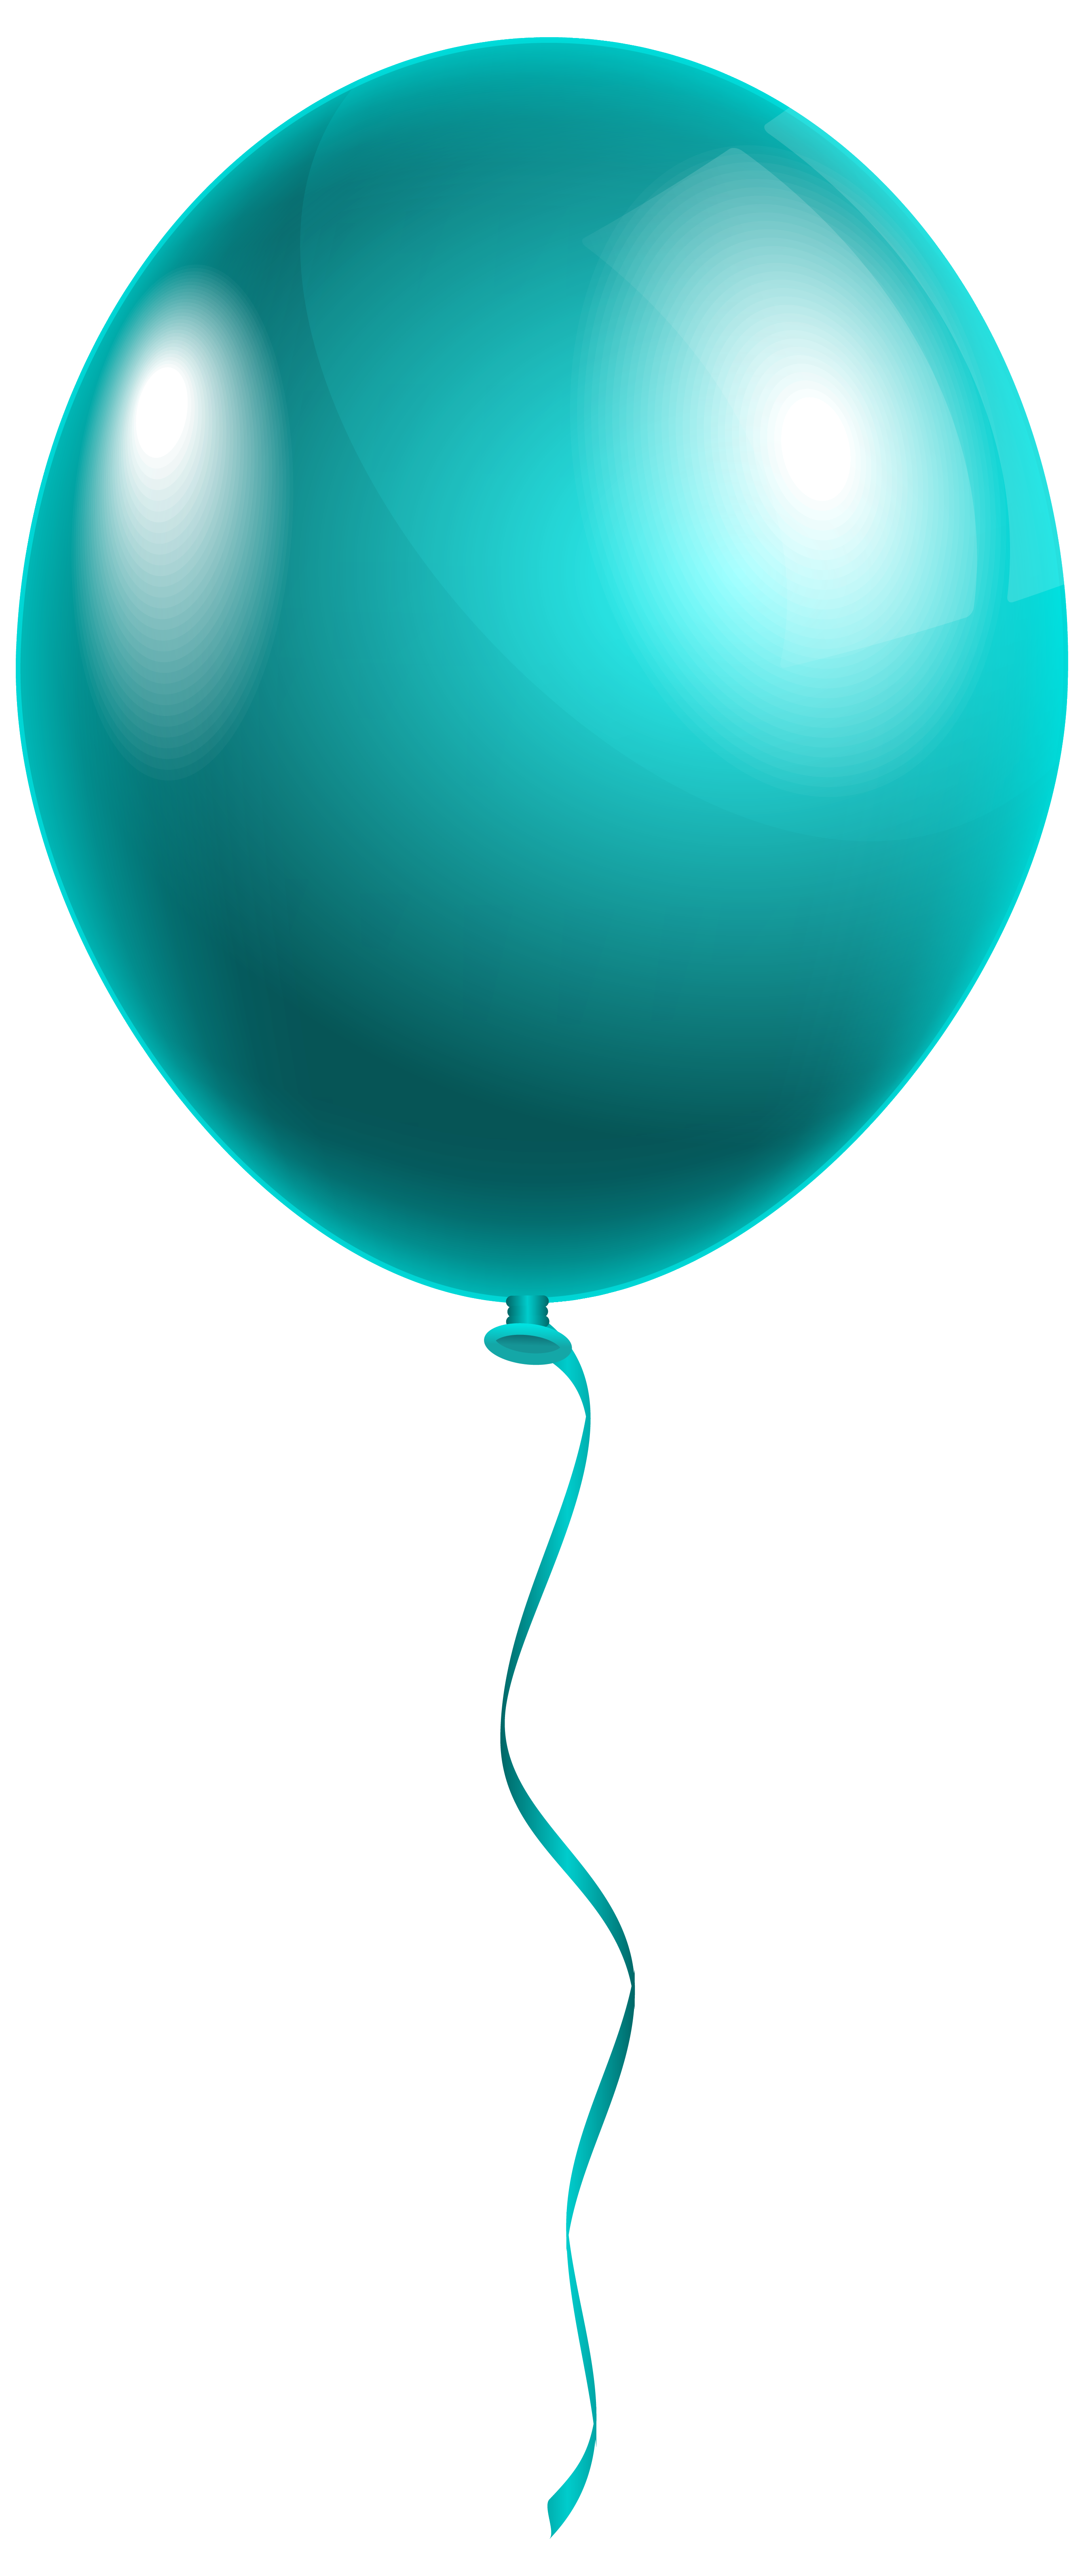 Free Blue Balloon Cliparts, Download Free Clip Art, Free ...